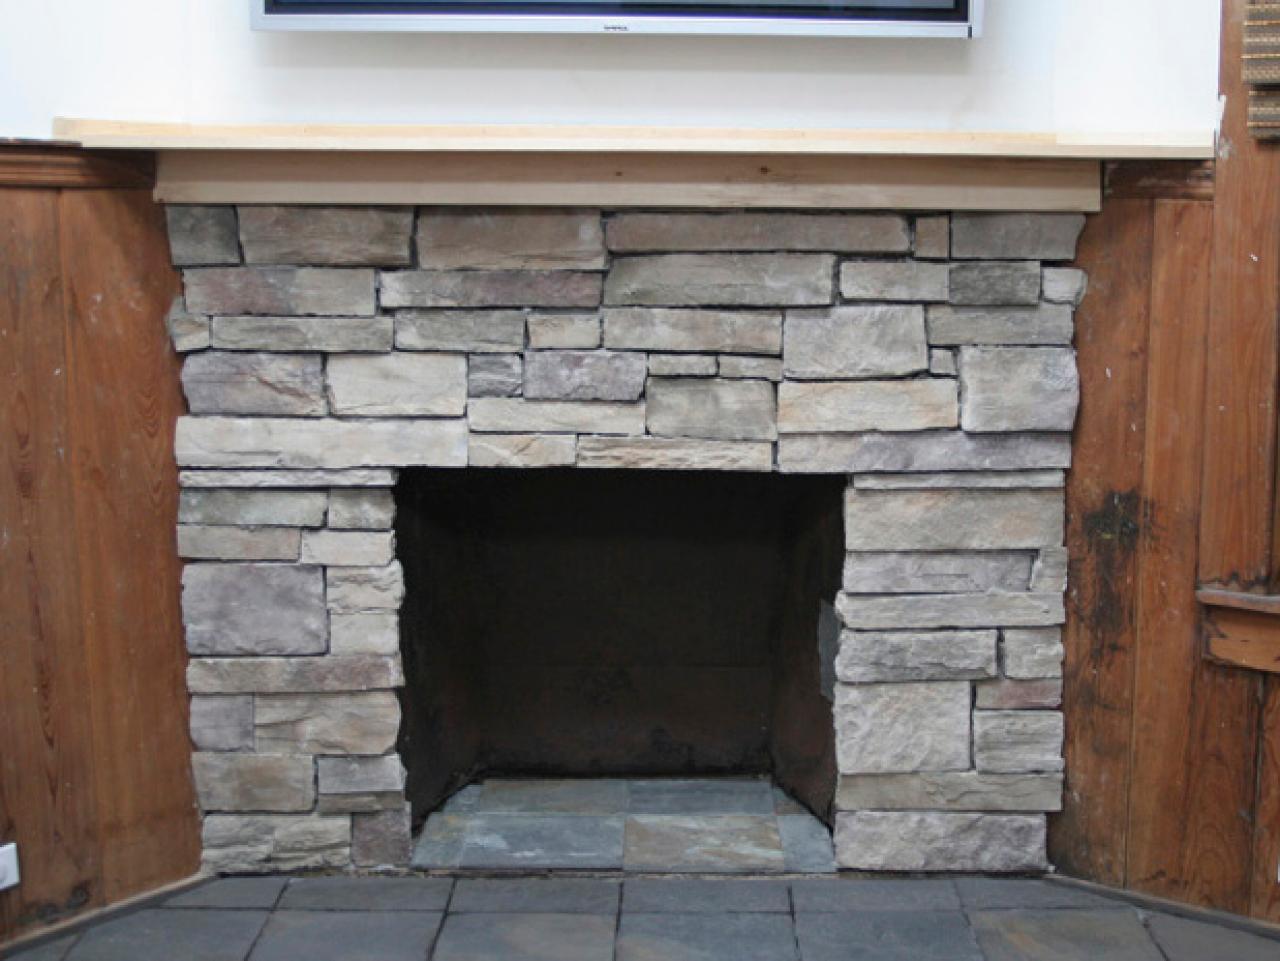 Brick Fireplace With Stone, Covering A Brick Fireplace Wall